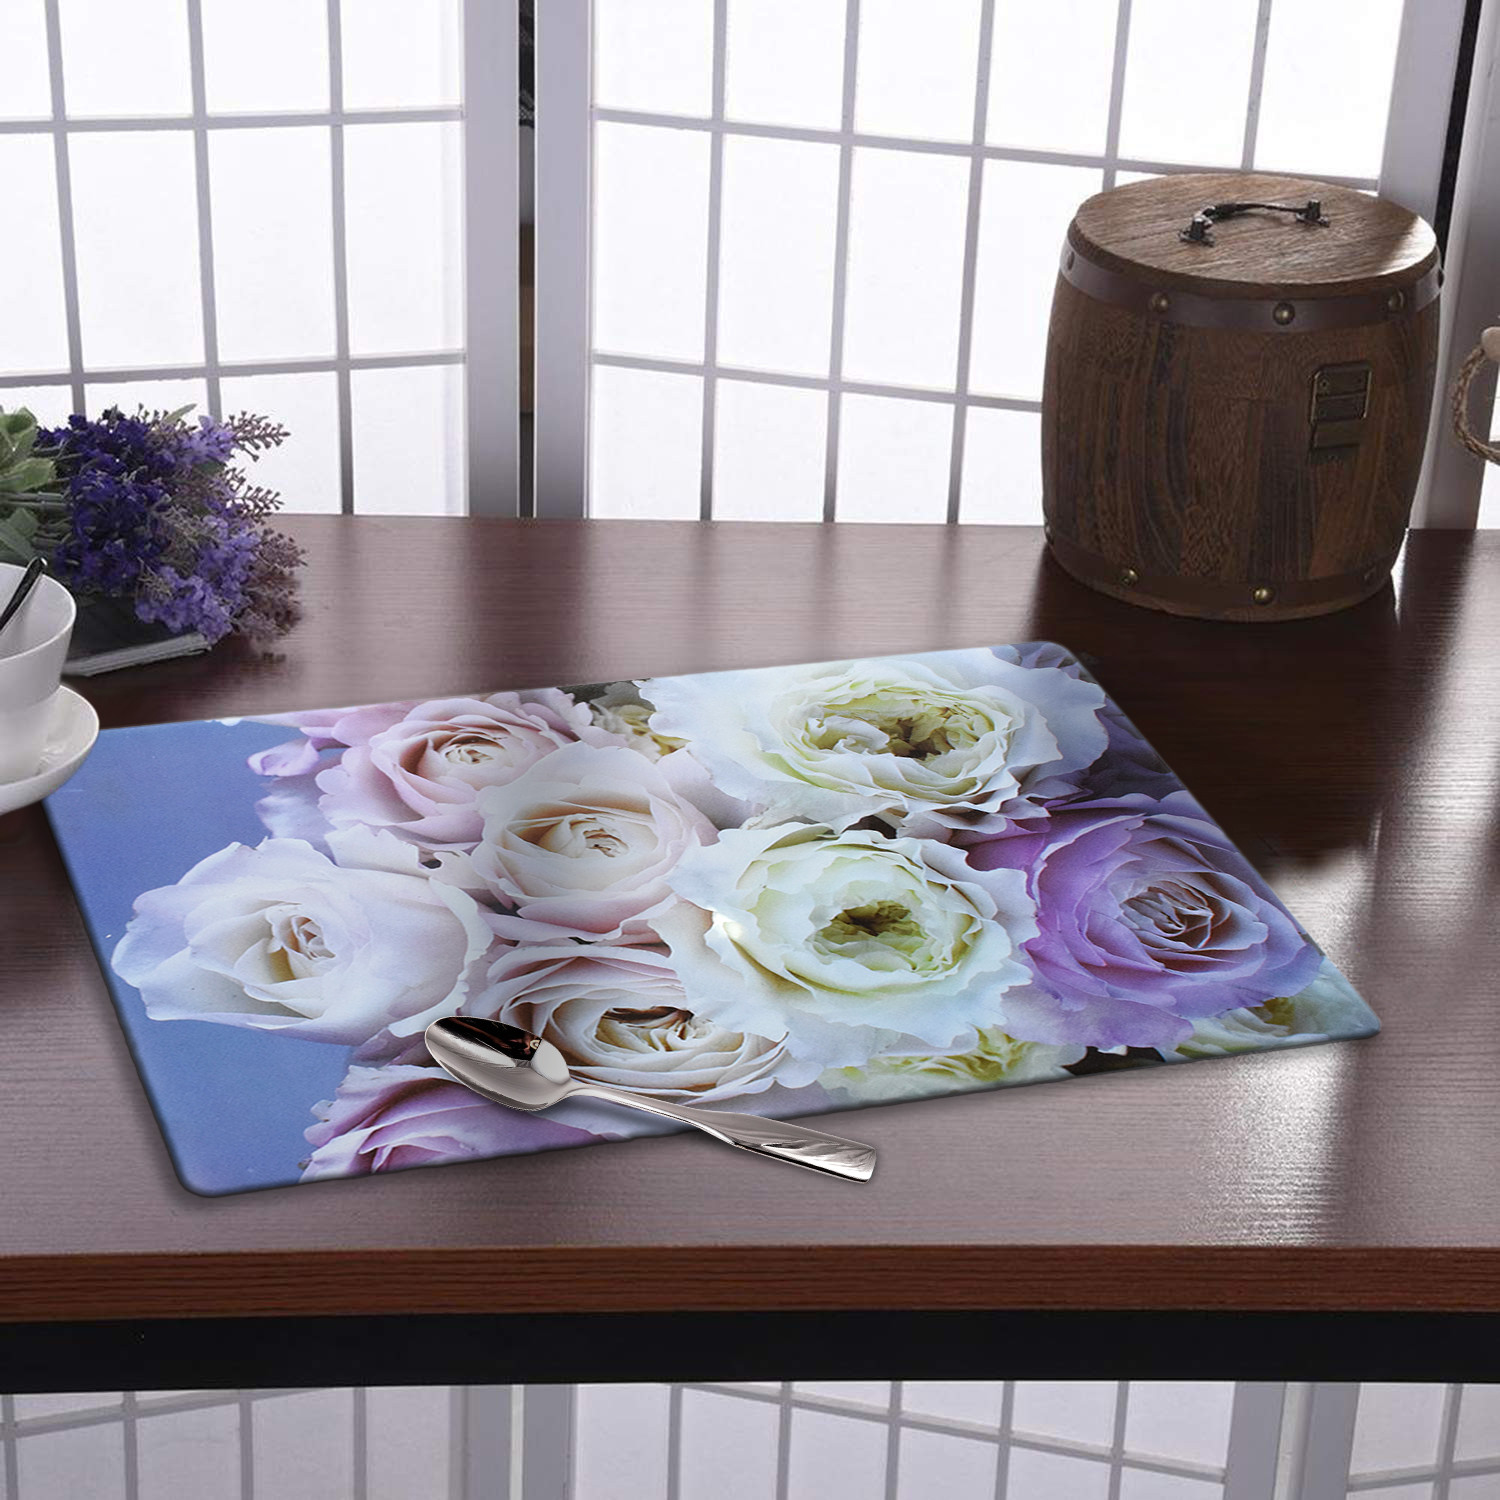 Kuber Industries Rose Print PVC Table Mats /Placemat With 6 Coasters For kitchen, Dining Table Set of 6 (Light Pink) 54KM4379